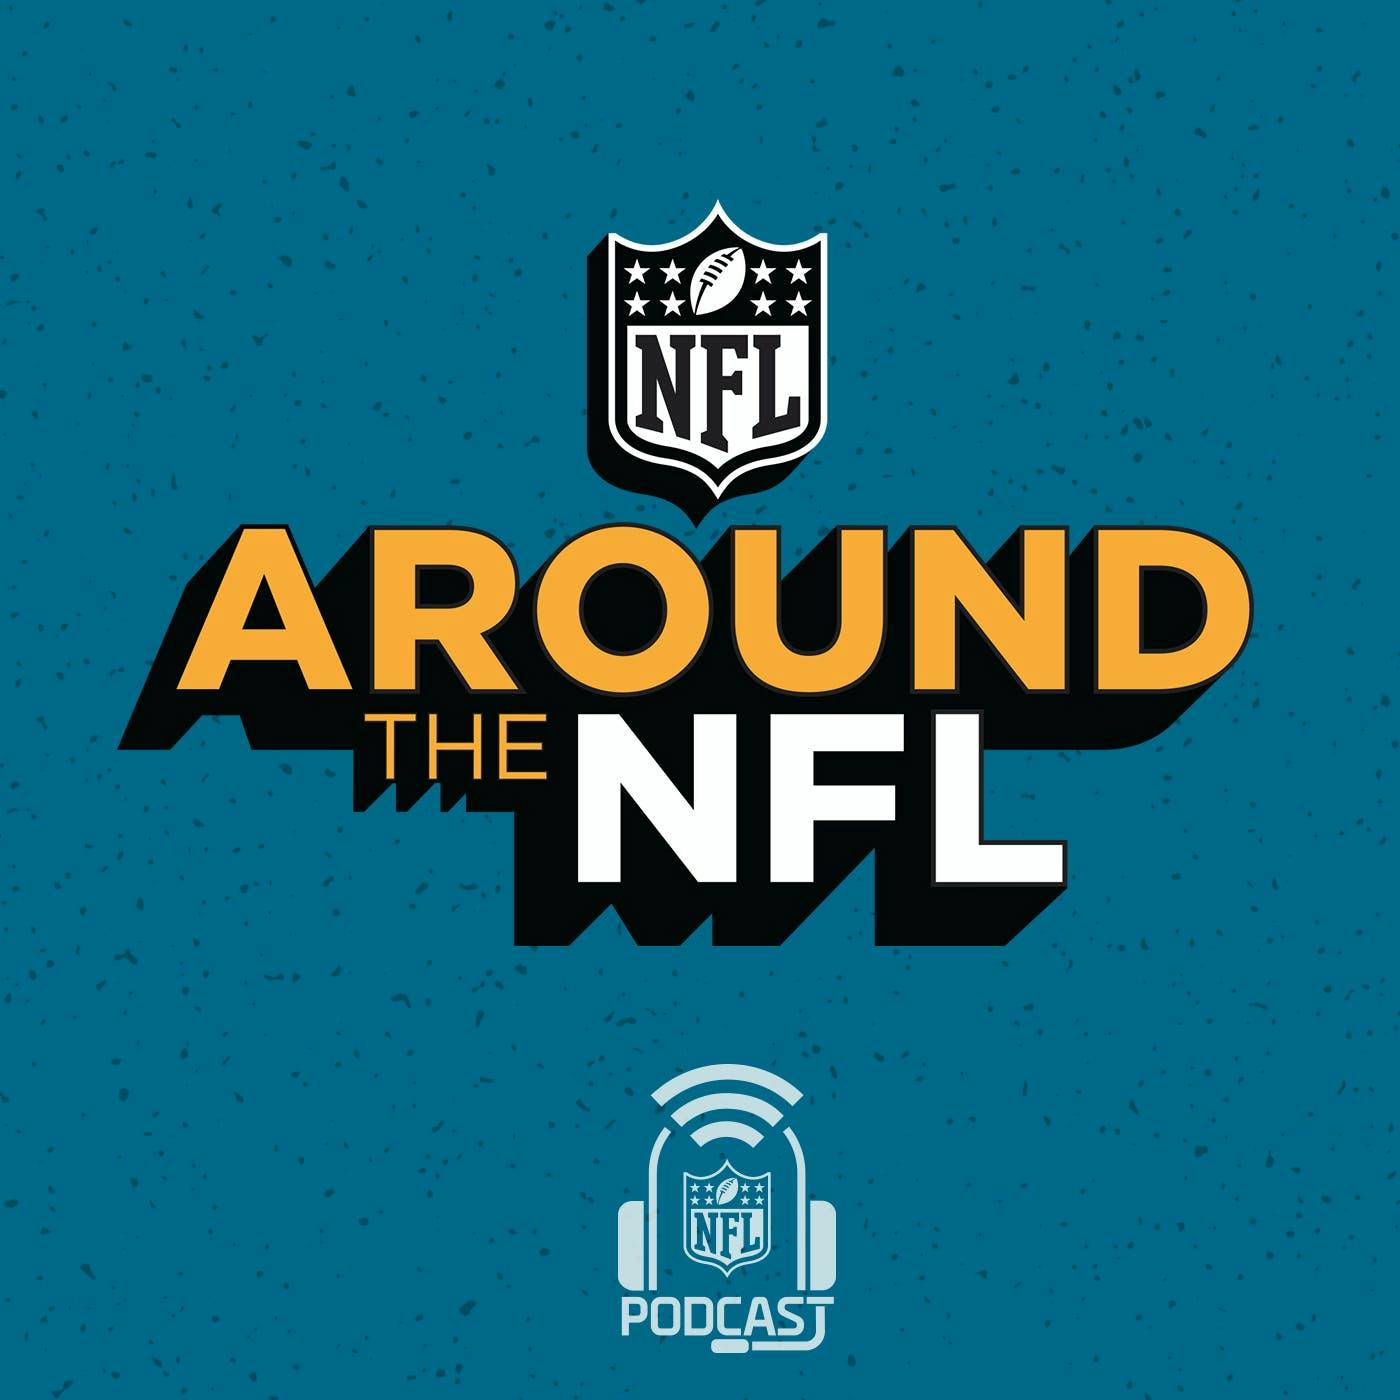 Around the NFL:iHeartRadio and NFL